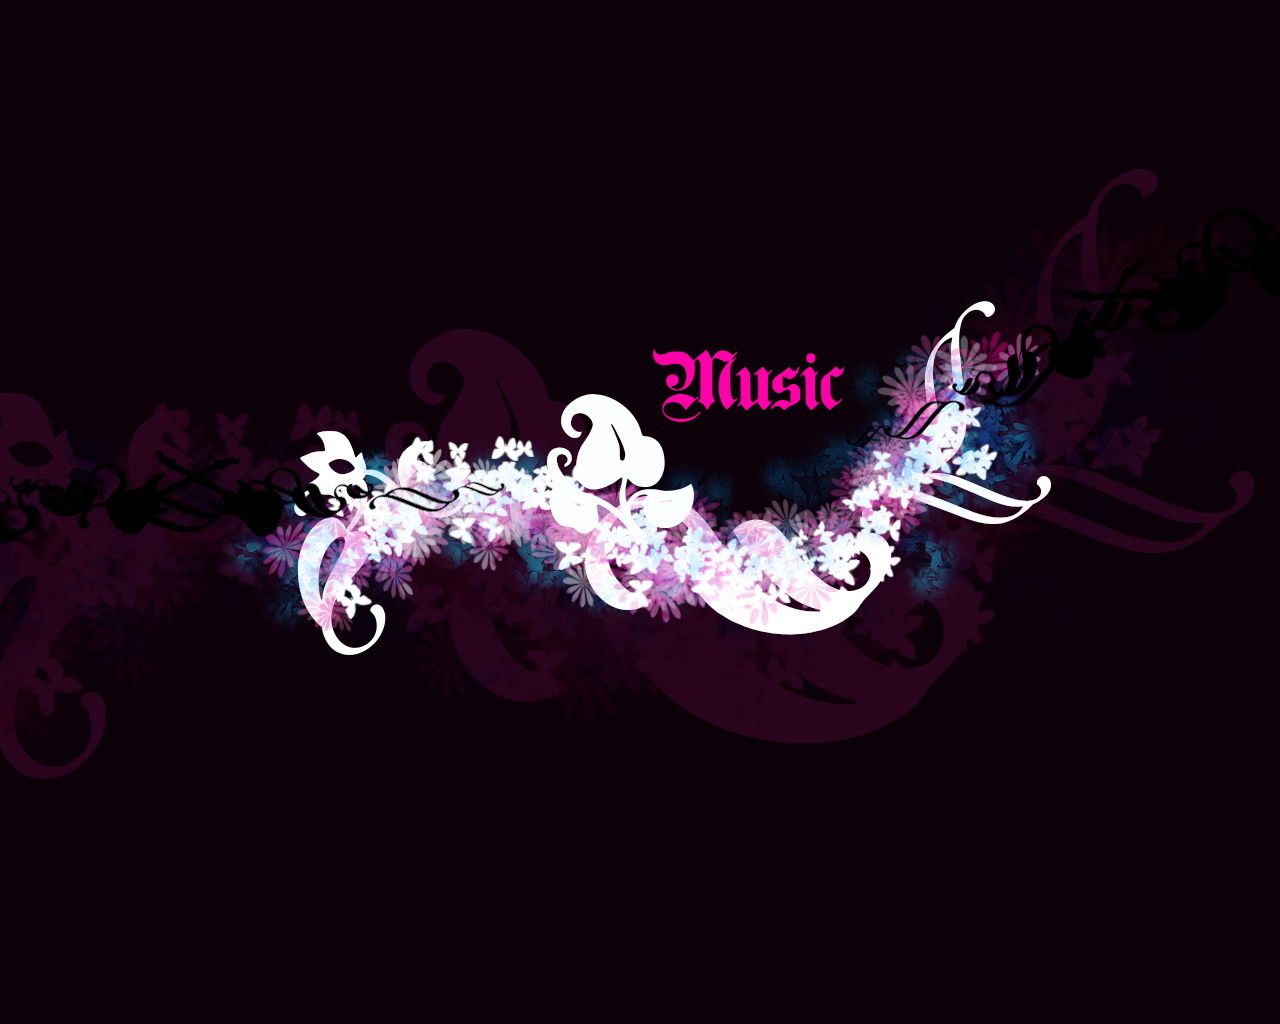 music Wallpaper   Christian Wallpapers and Backgrounds 1280x1024